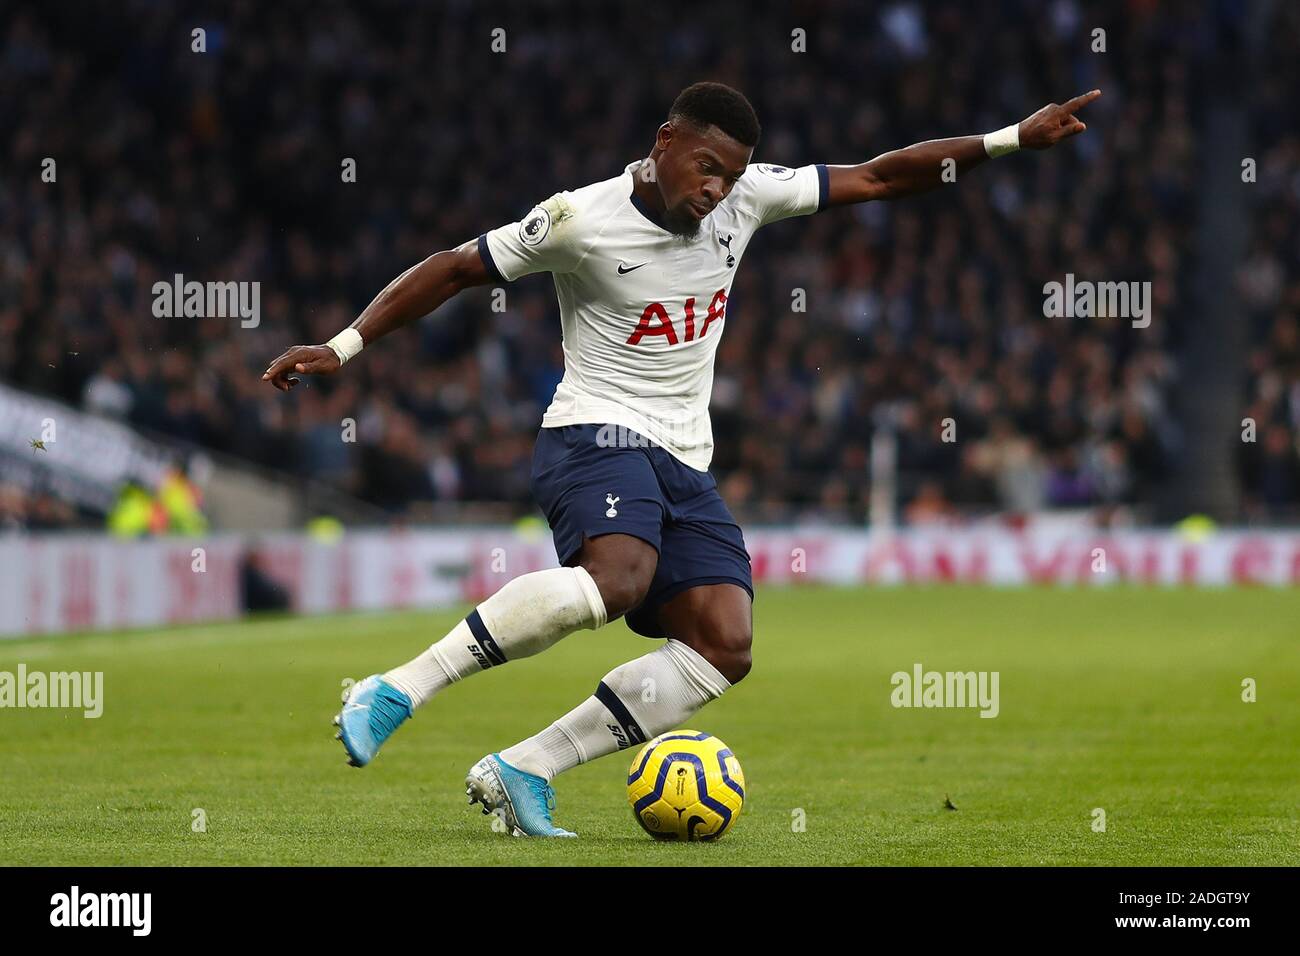 Serge Aurier of Tottenham Hotspur in action during the Premier League match between Tottenham Hotspur and AFC Bournemouth at the Tottenham Hotspur Stadium.Final Score; Tottenham Hotspur 3: 2 AFC Bournemouth. Stock Photo